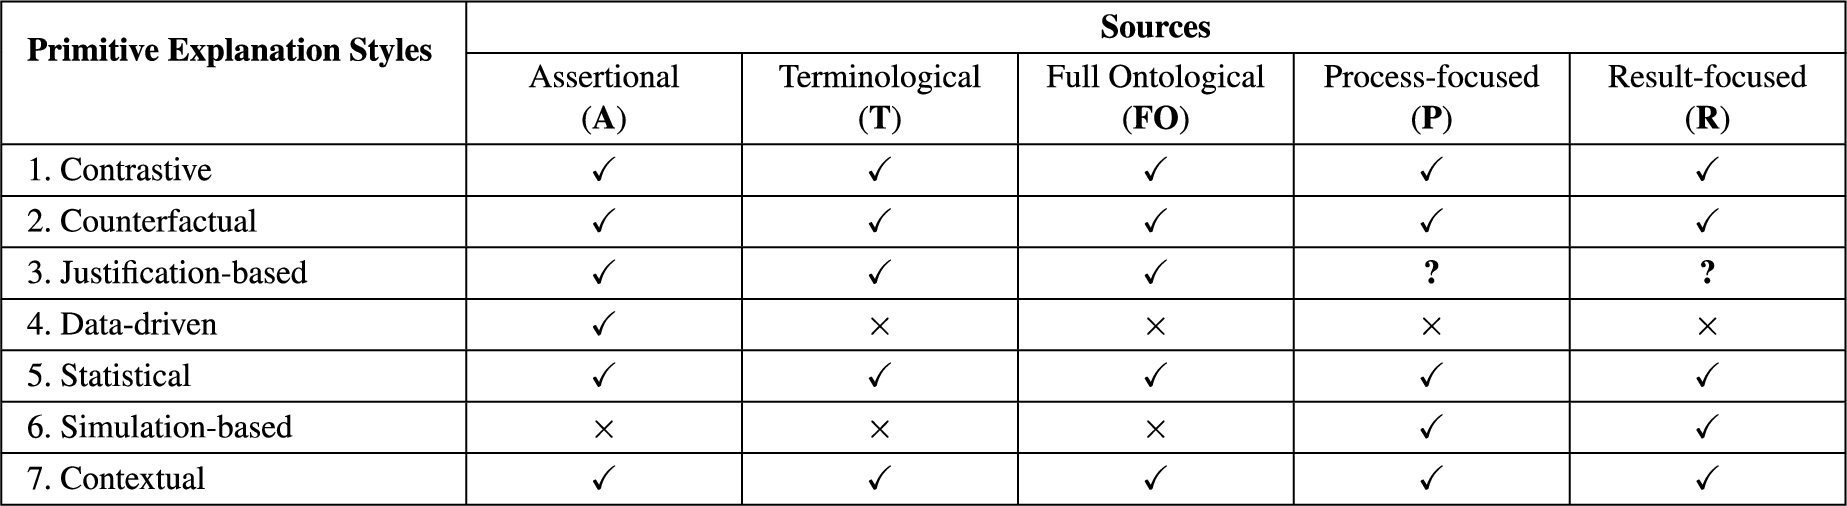 Sources available to each primitive explanation style. Checkmarks indicate availability, crosses indicate non-availability, and question marks are used when sources are potentially available (exploring the specific conditions is outside the scope of this work).